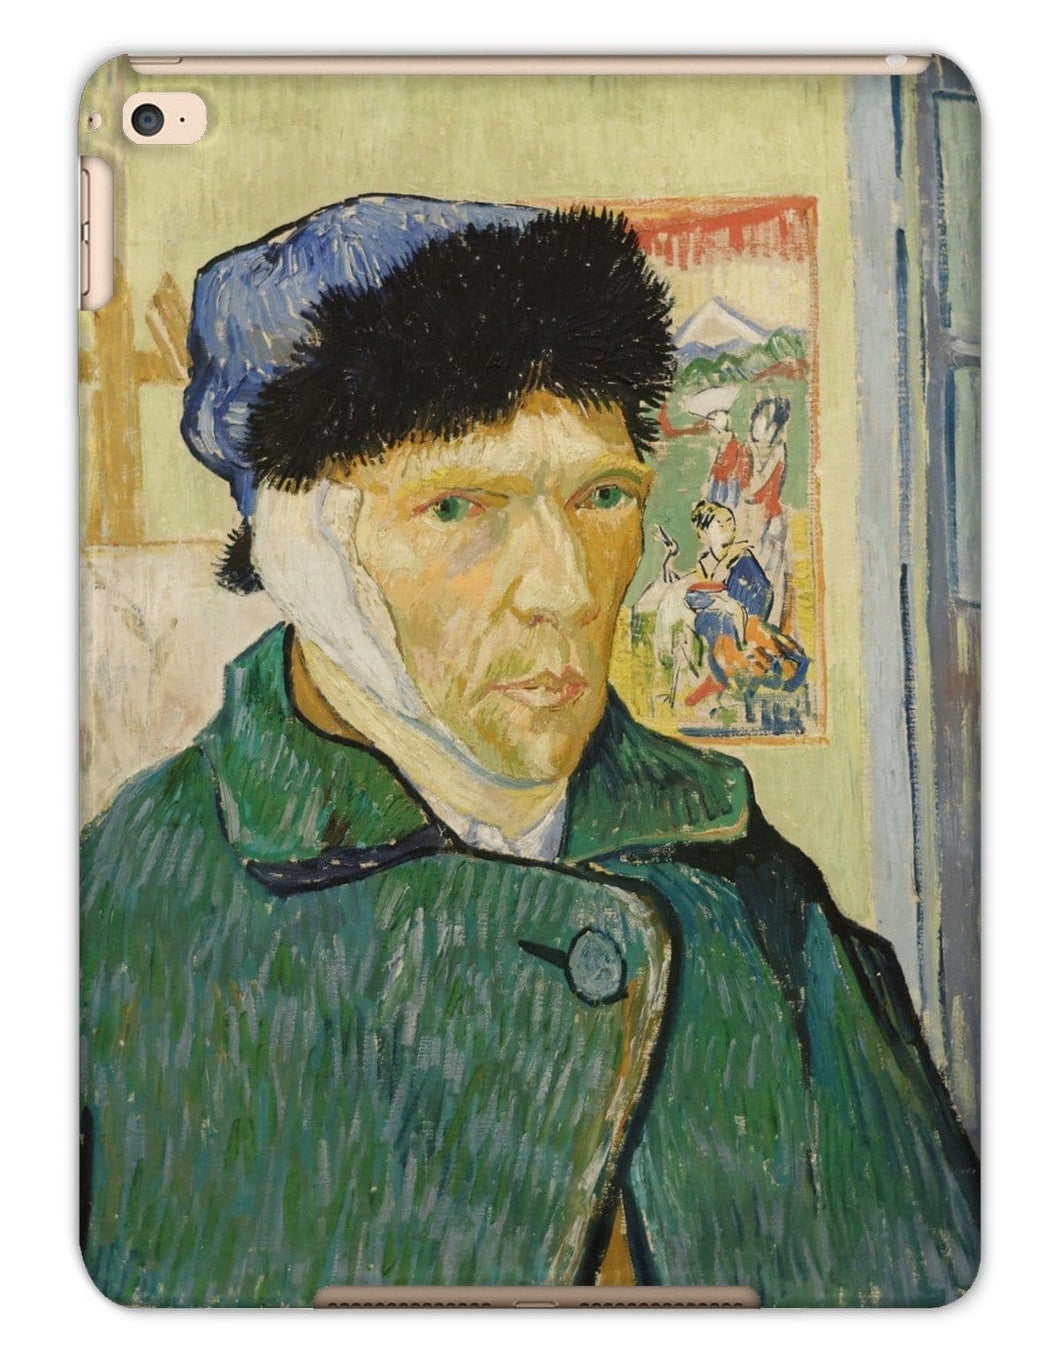 Self Portrait with Bandaged Ear by Vincent van Gogh. iPad Air 2 / Matte - Exact Art